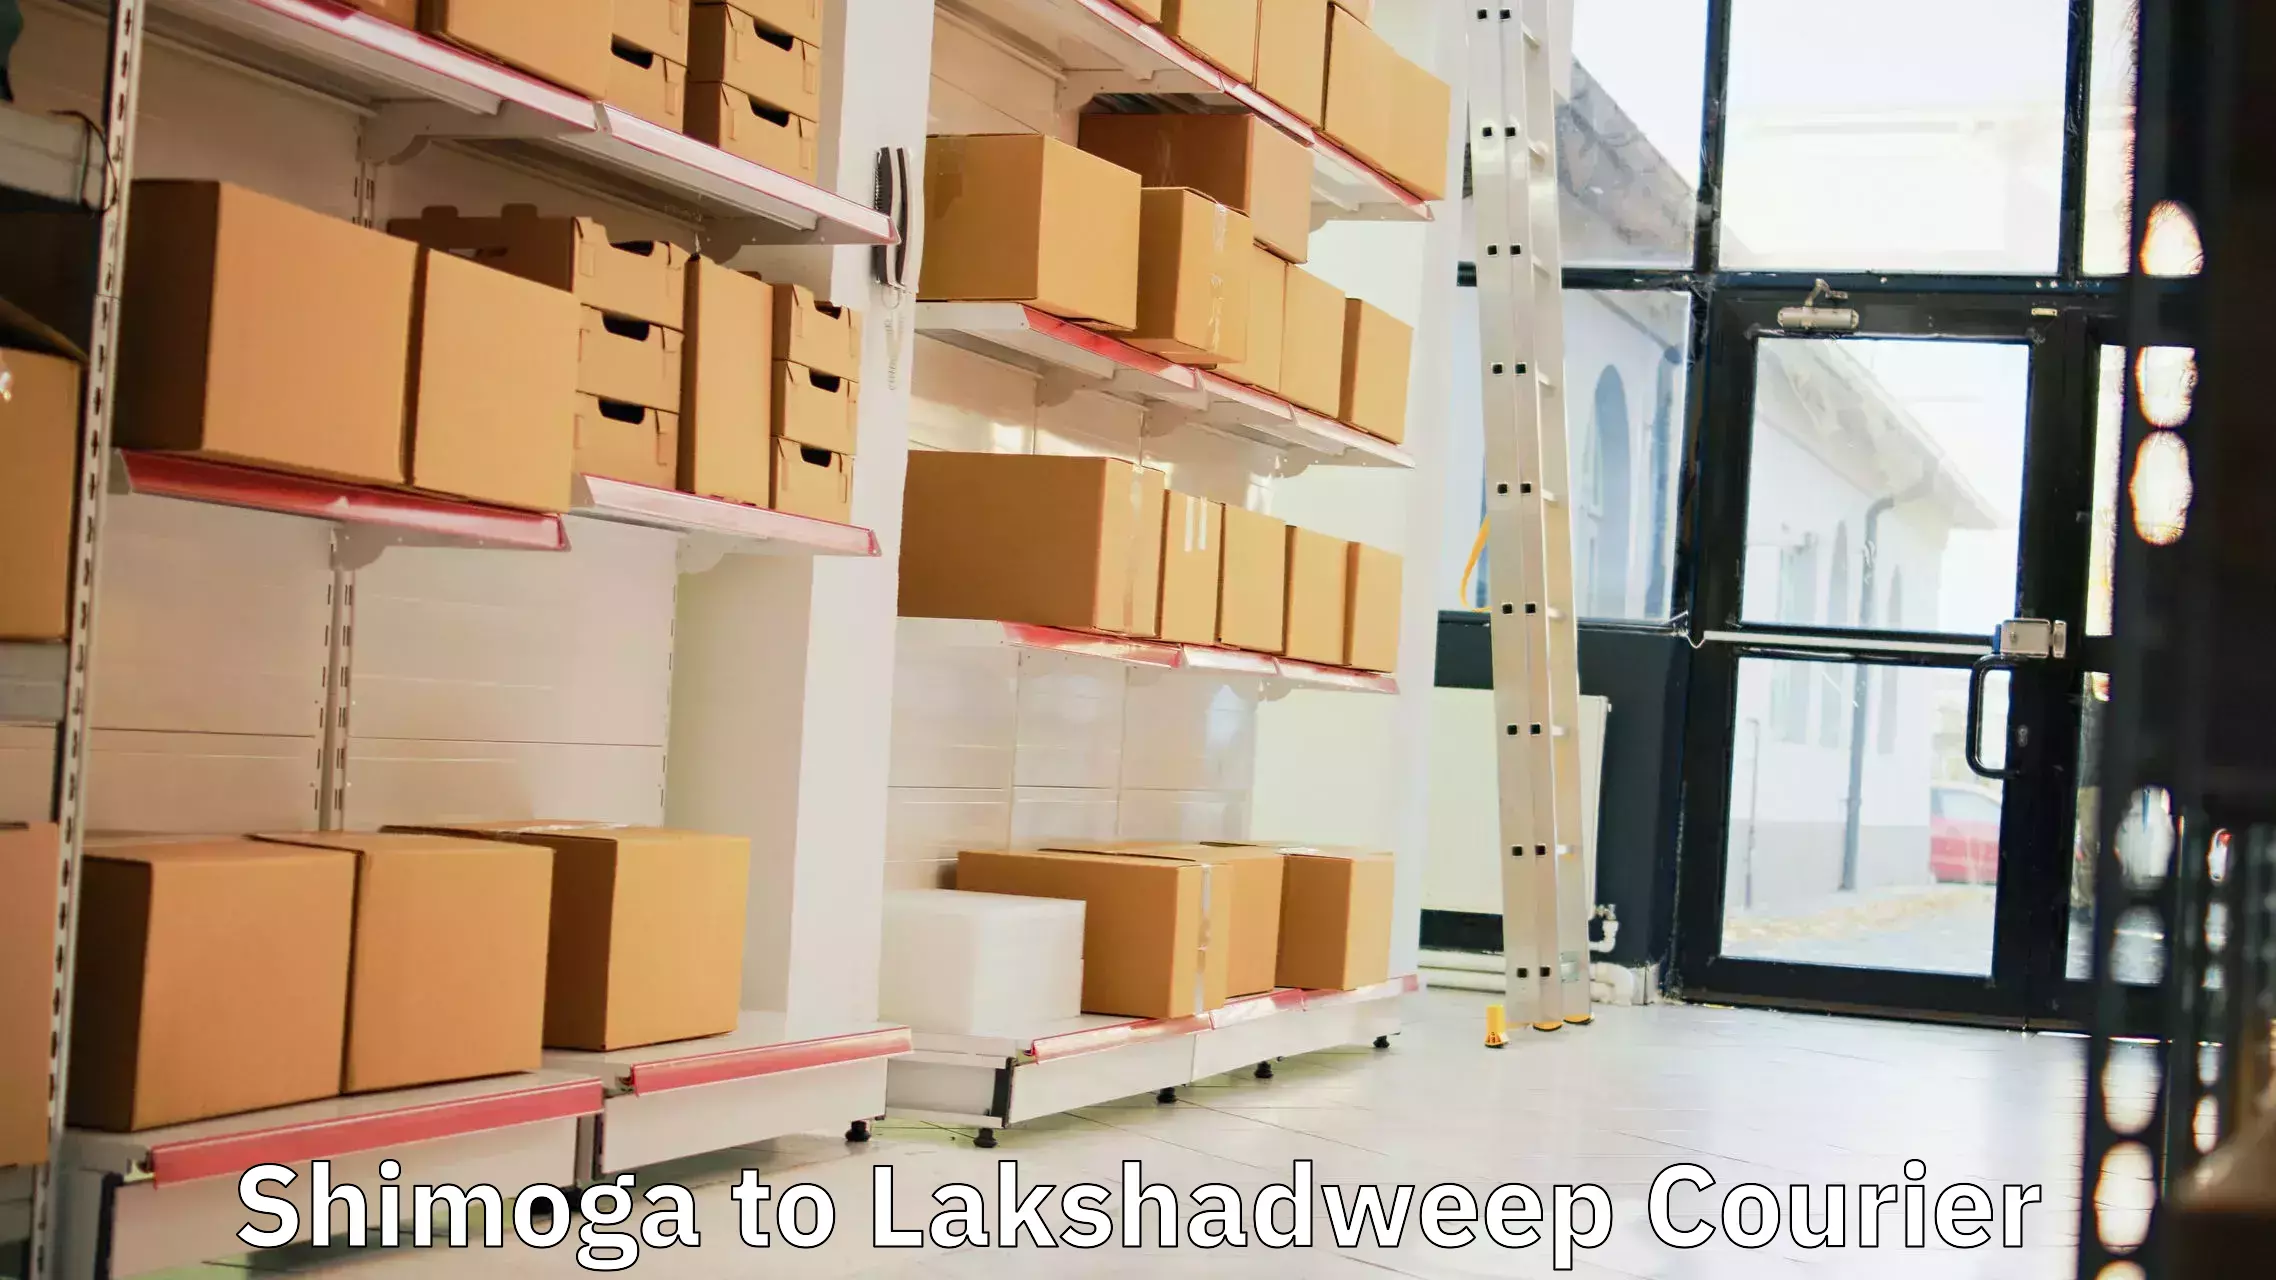 Business delivery service Shimoga to Lakshadweep